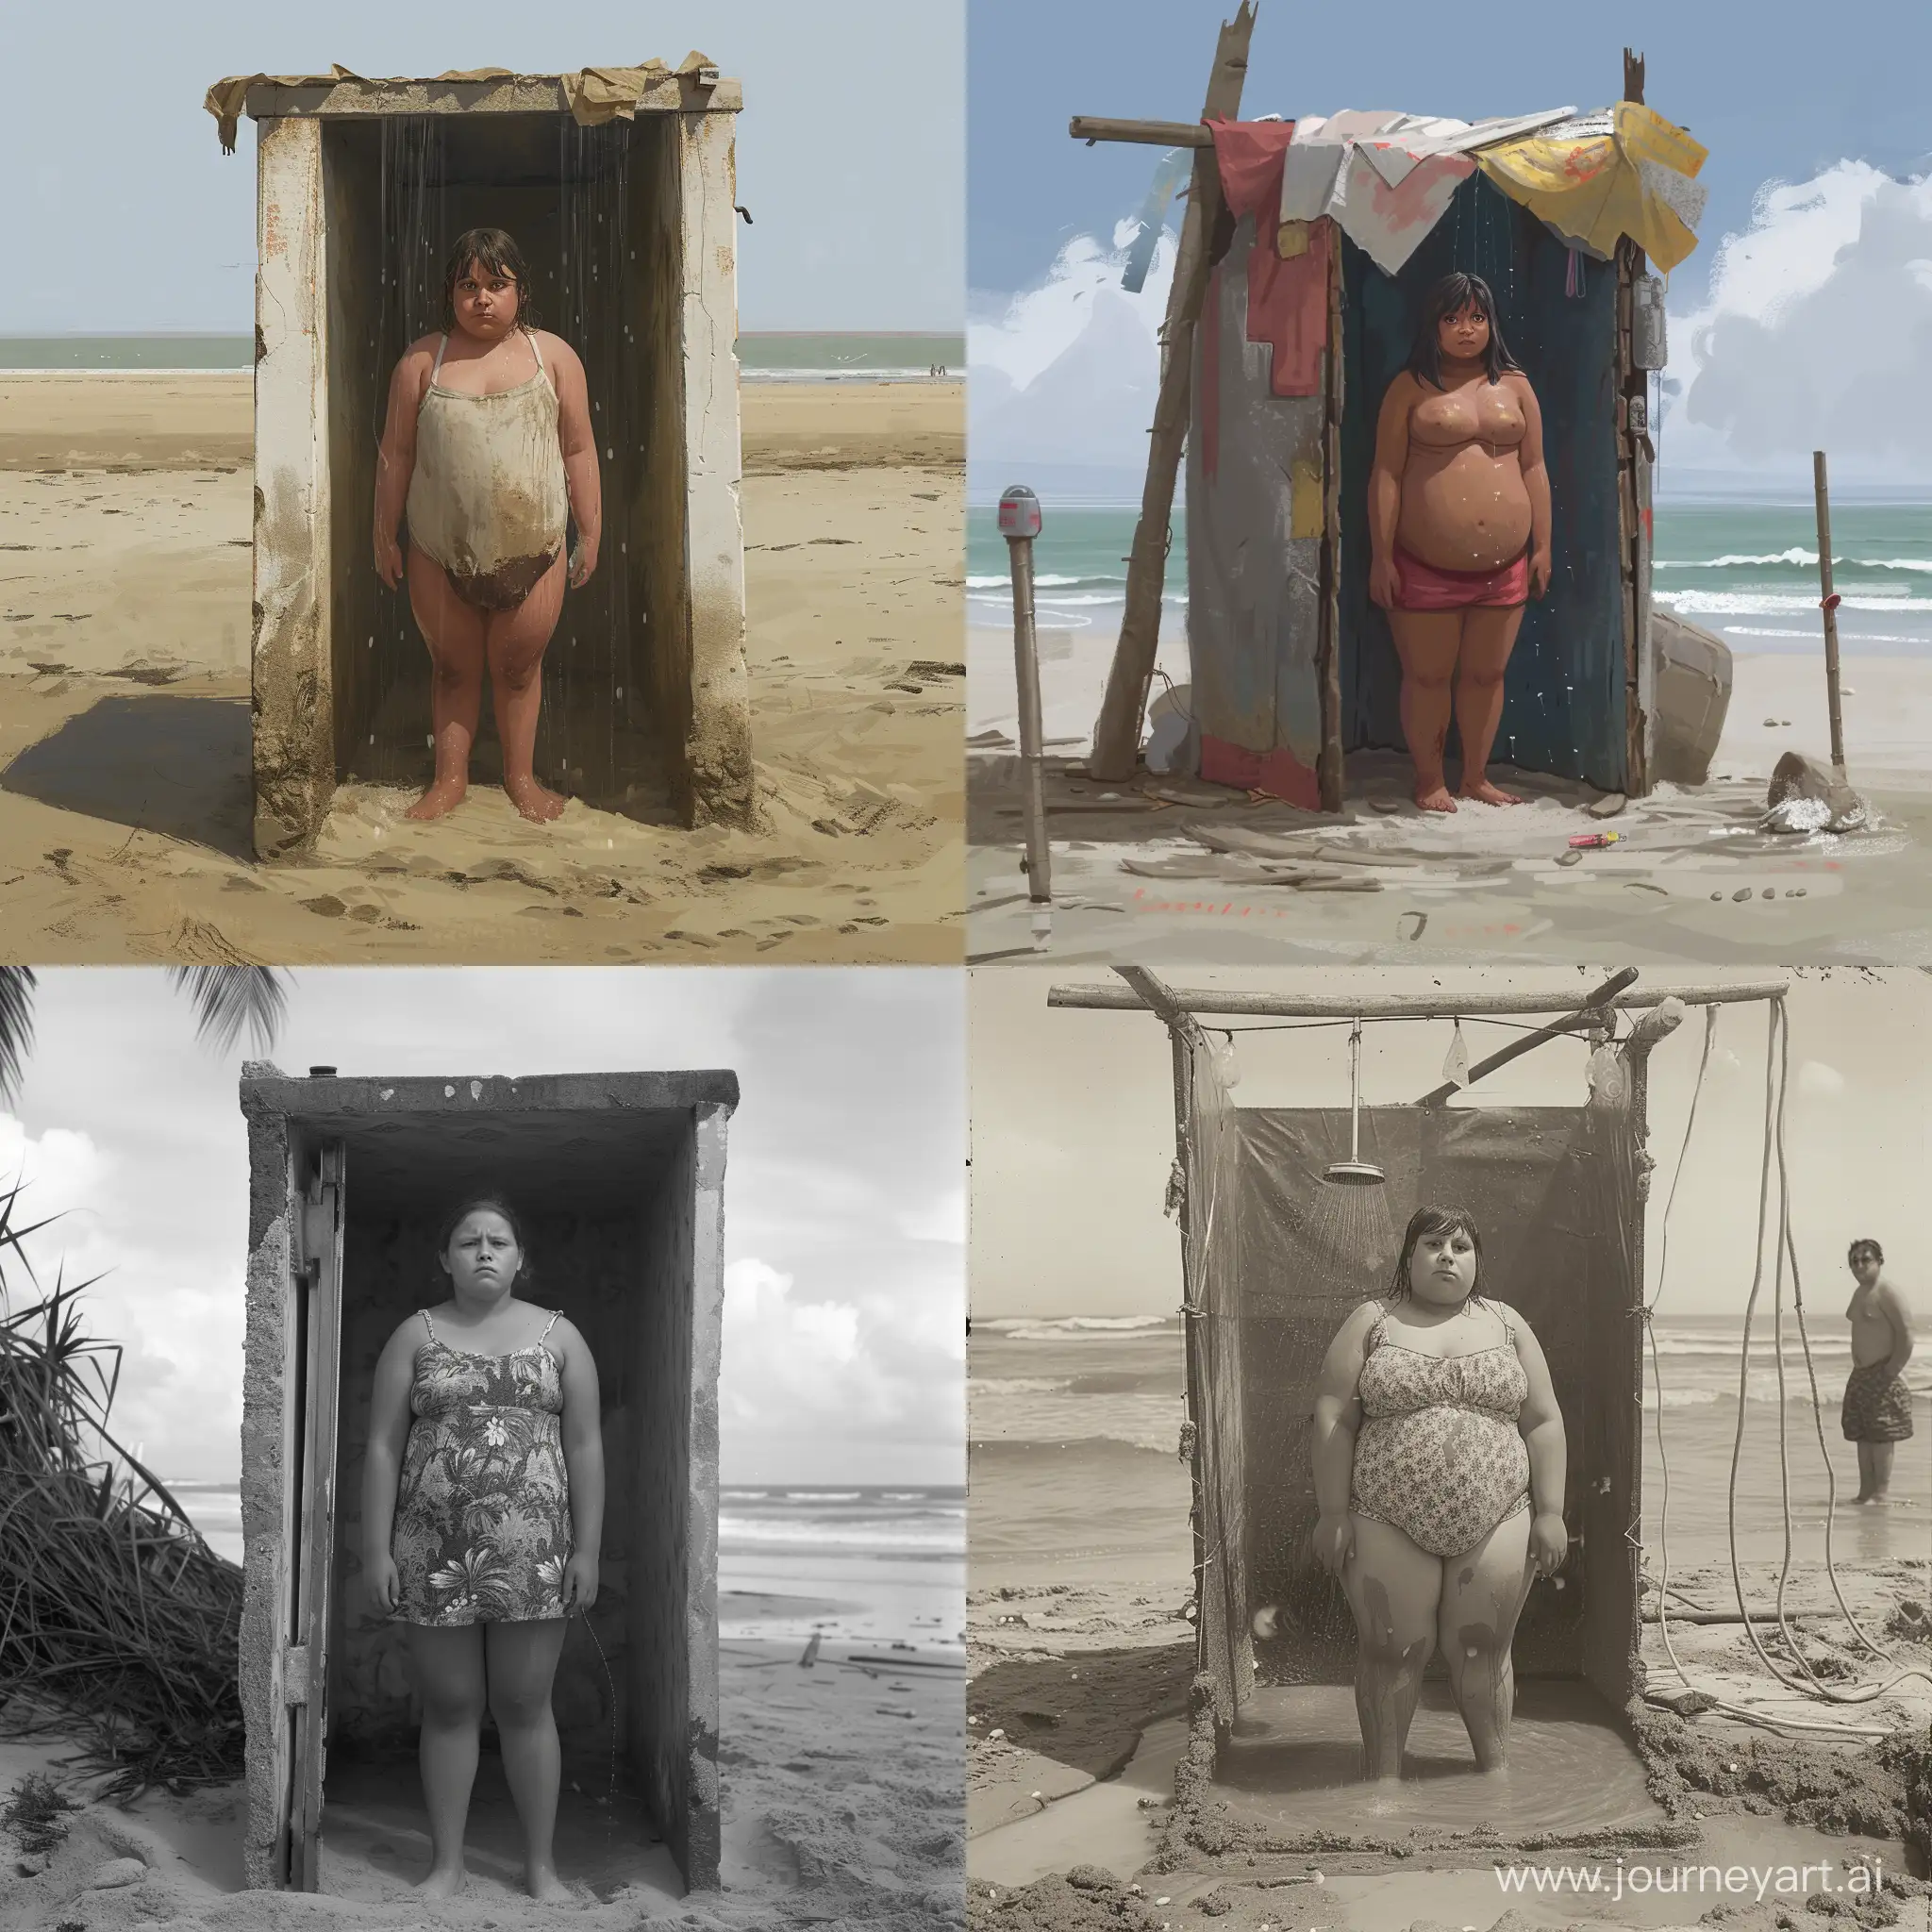 a girl standing full-length, she is of stout build, she is standing in a makeshift shower structure on the beach.